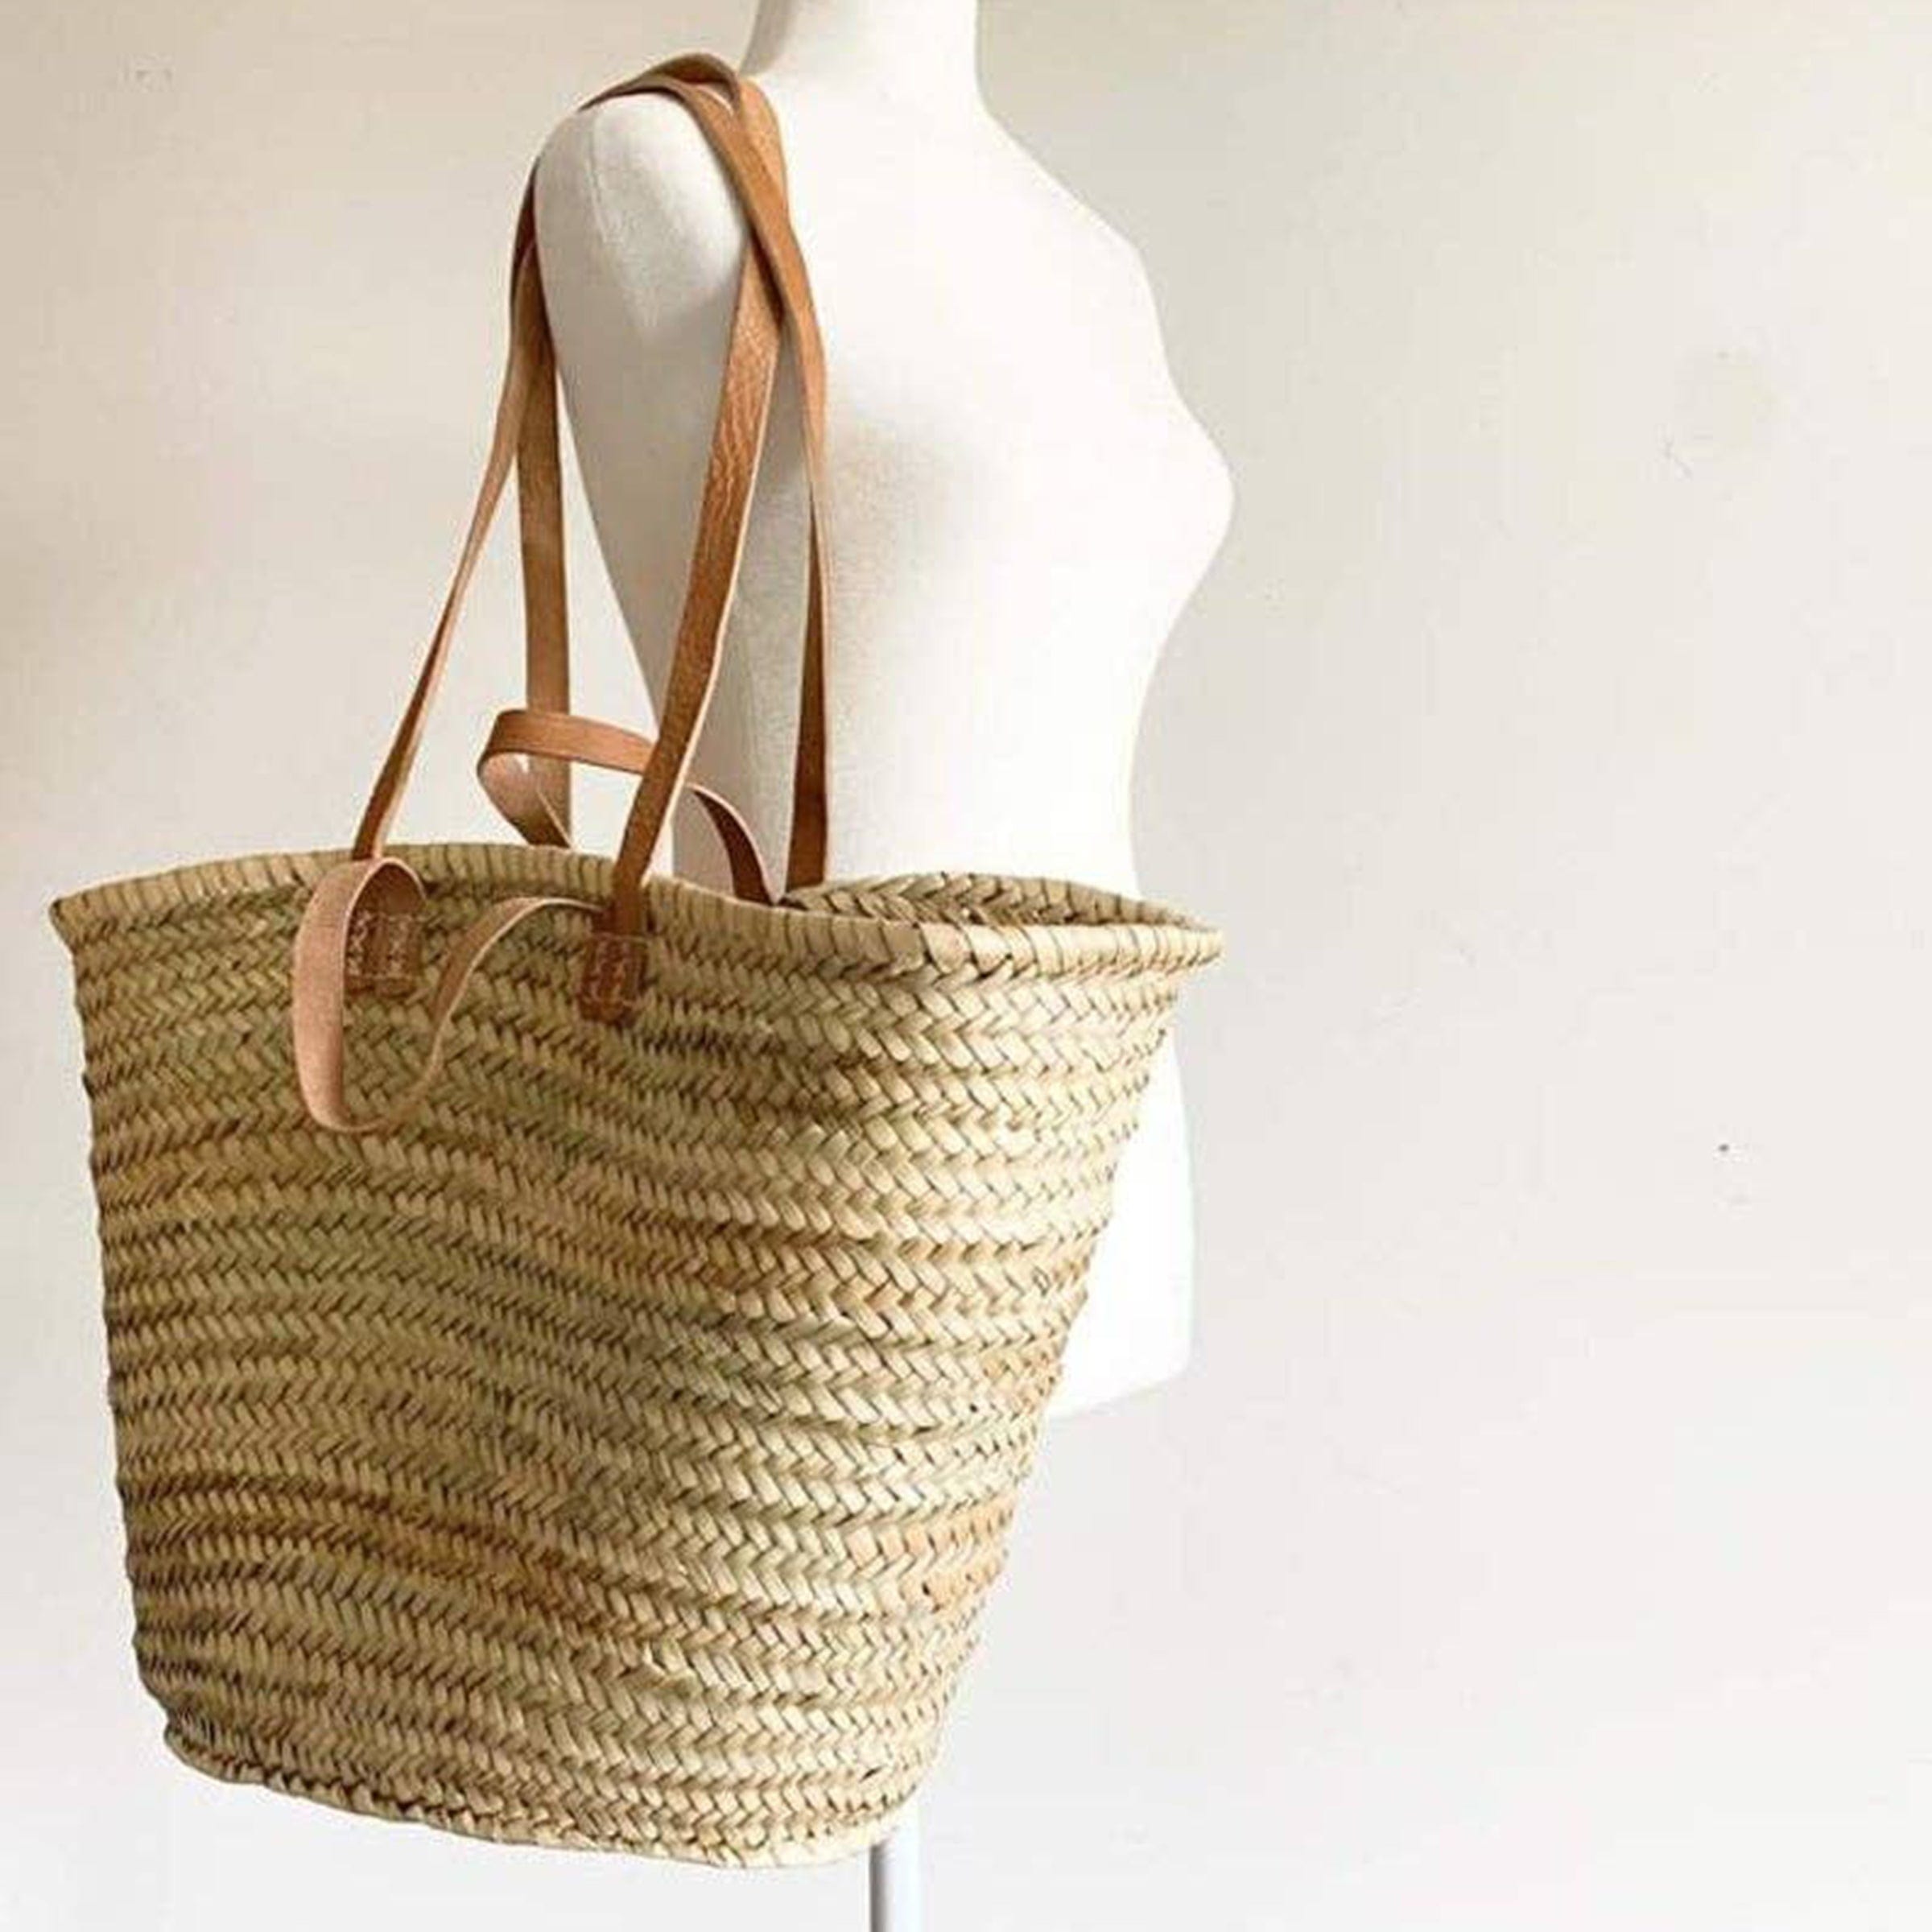 Woven Wood Baskets with Leather Handles – Shoppe Apiary